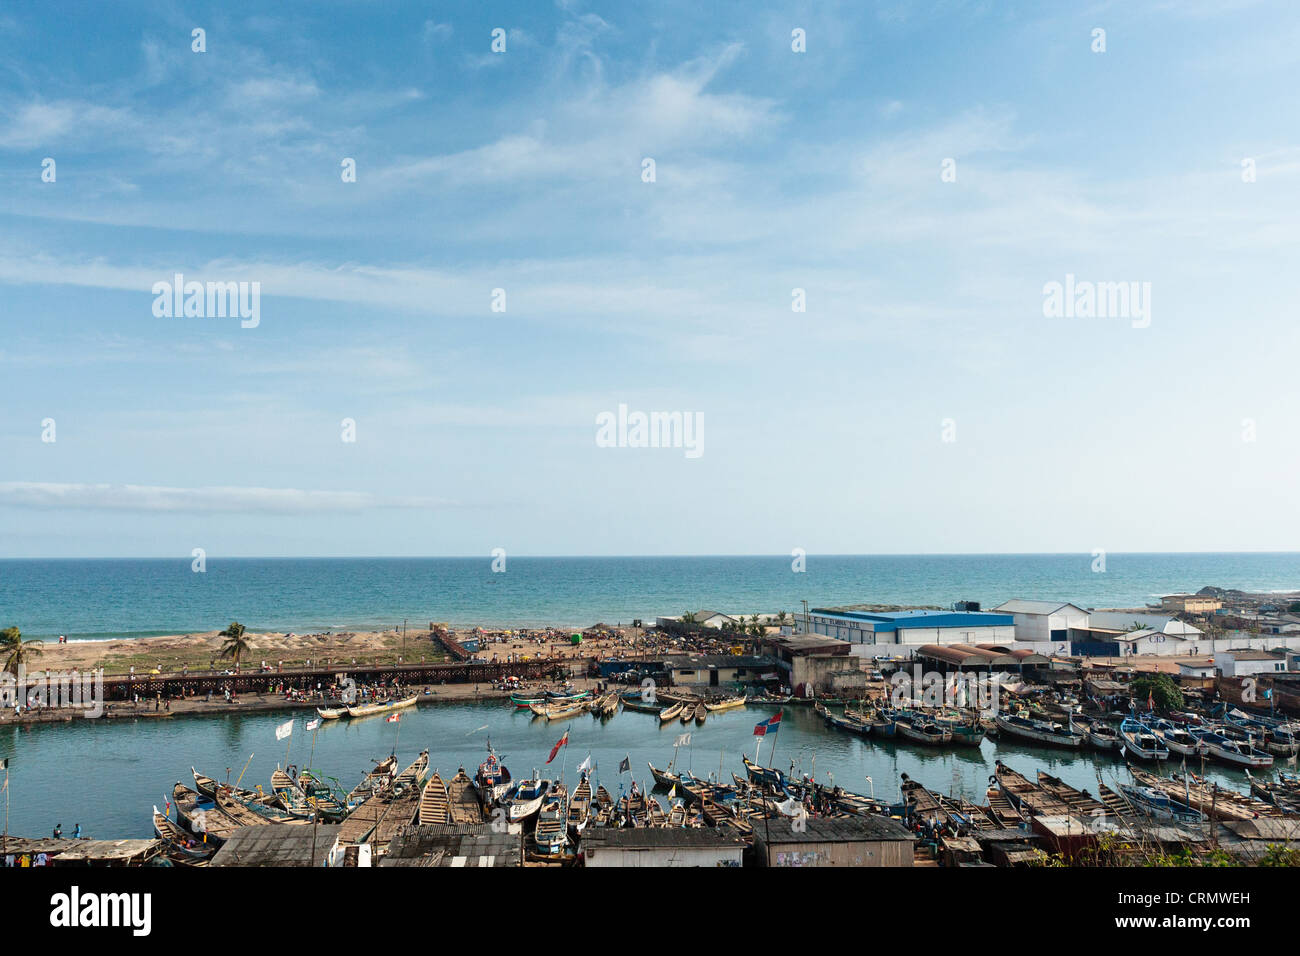 View of the fishing harbor of Elmina, about 130km west of Ghana's capital Accra on Thursday April 9, 2009. Stock Photo